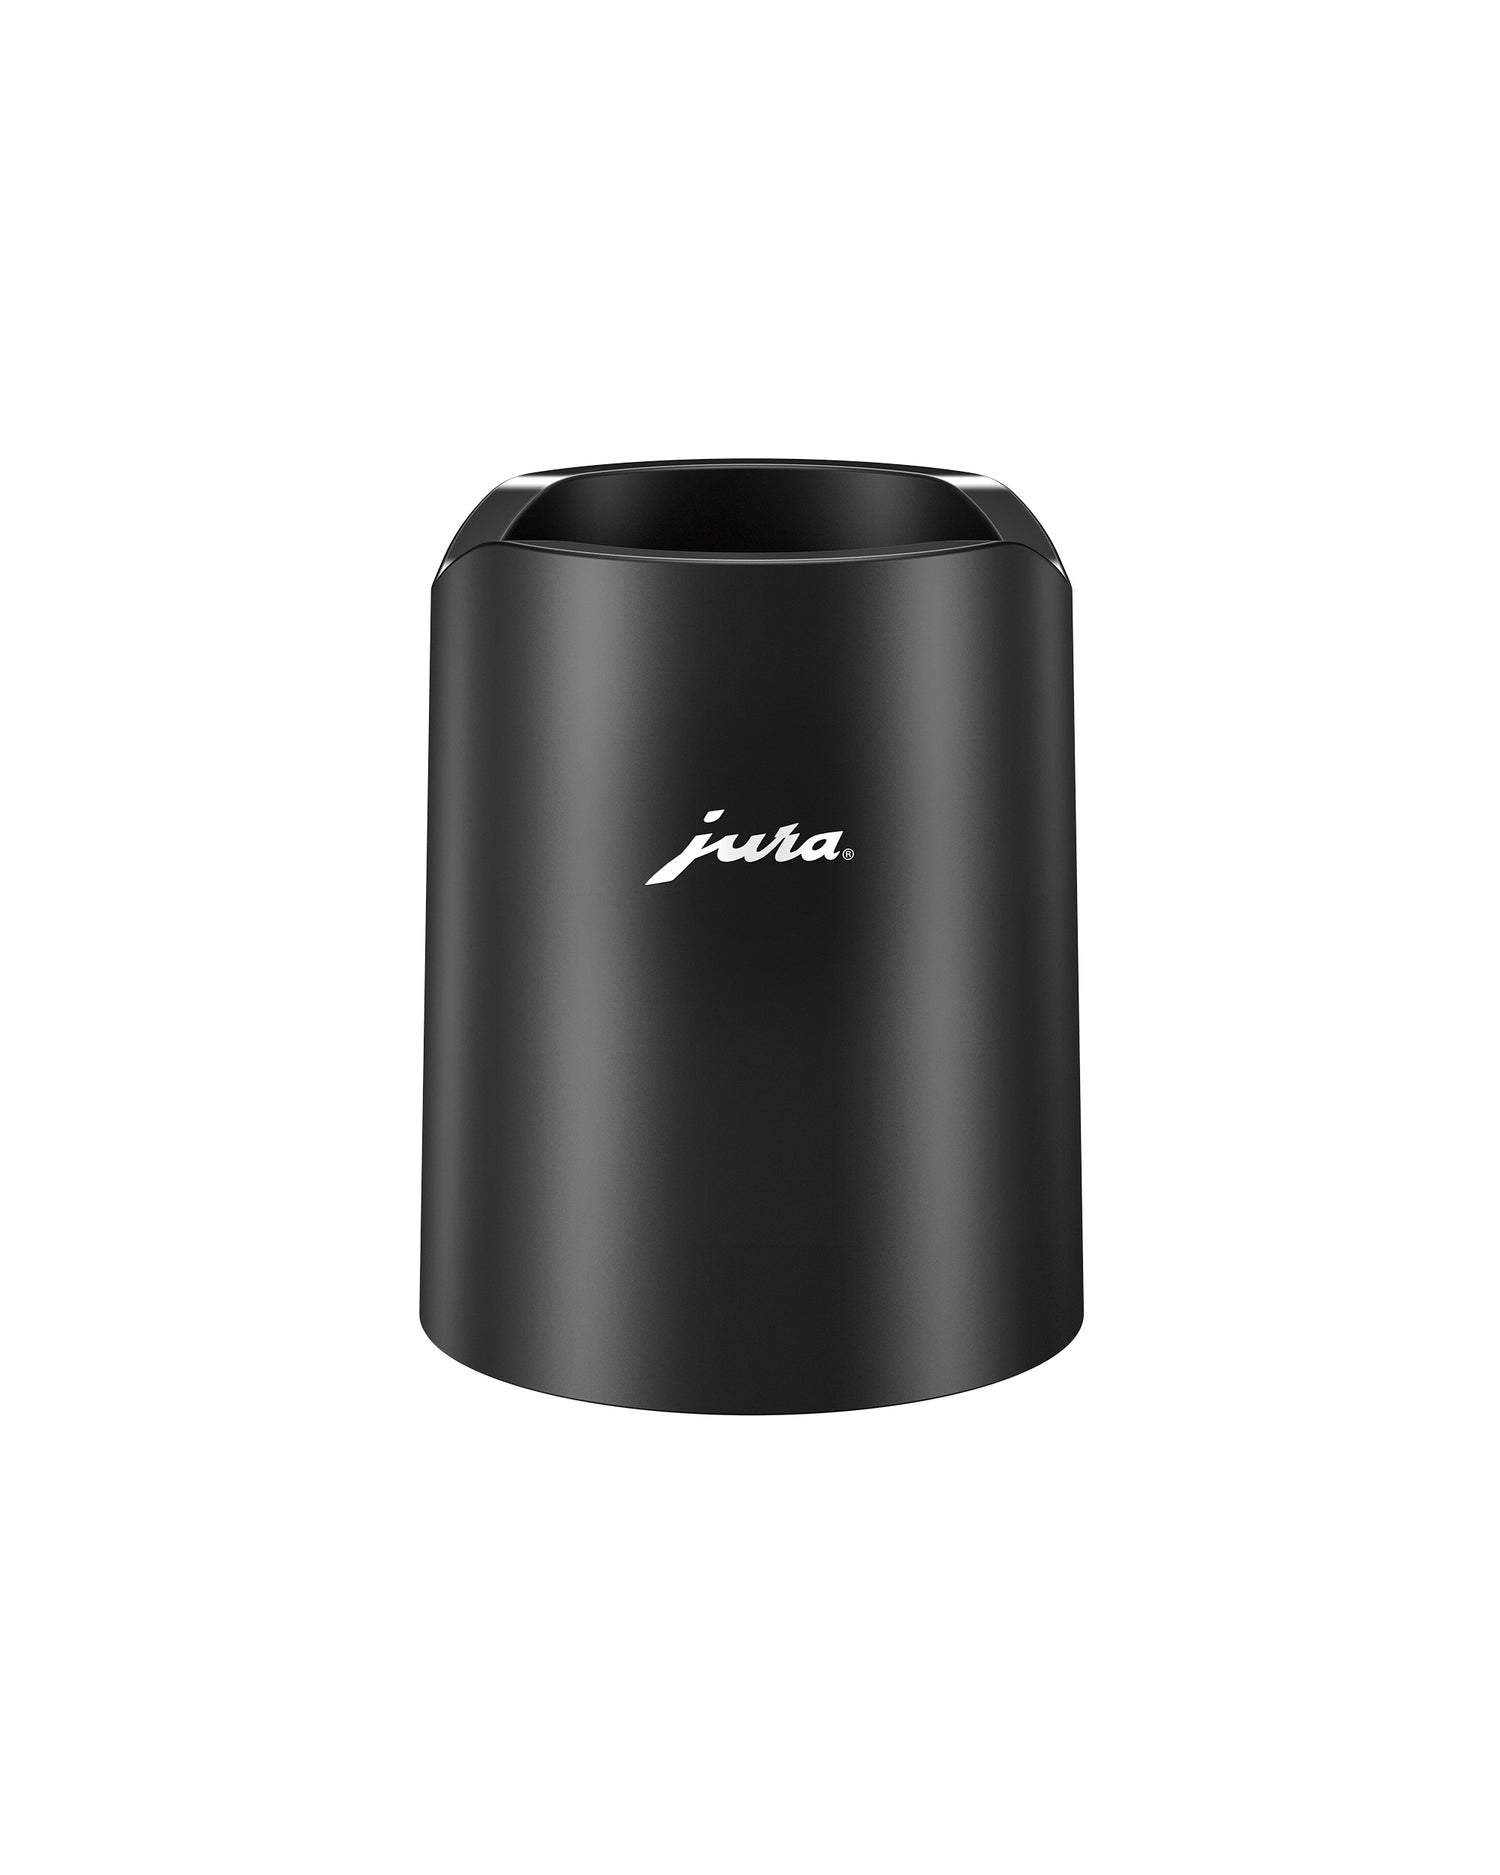 Complementary products with JURA glass milk container